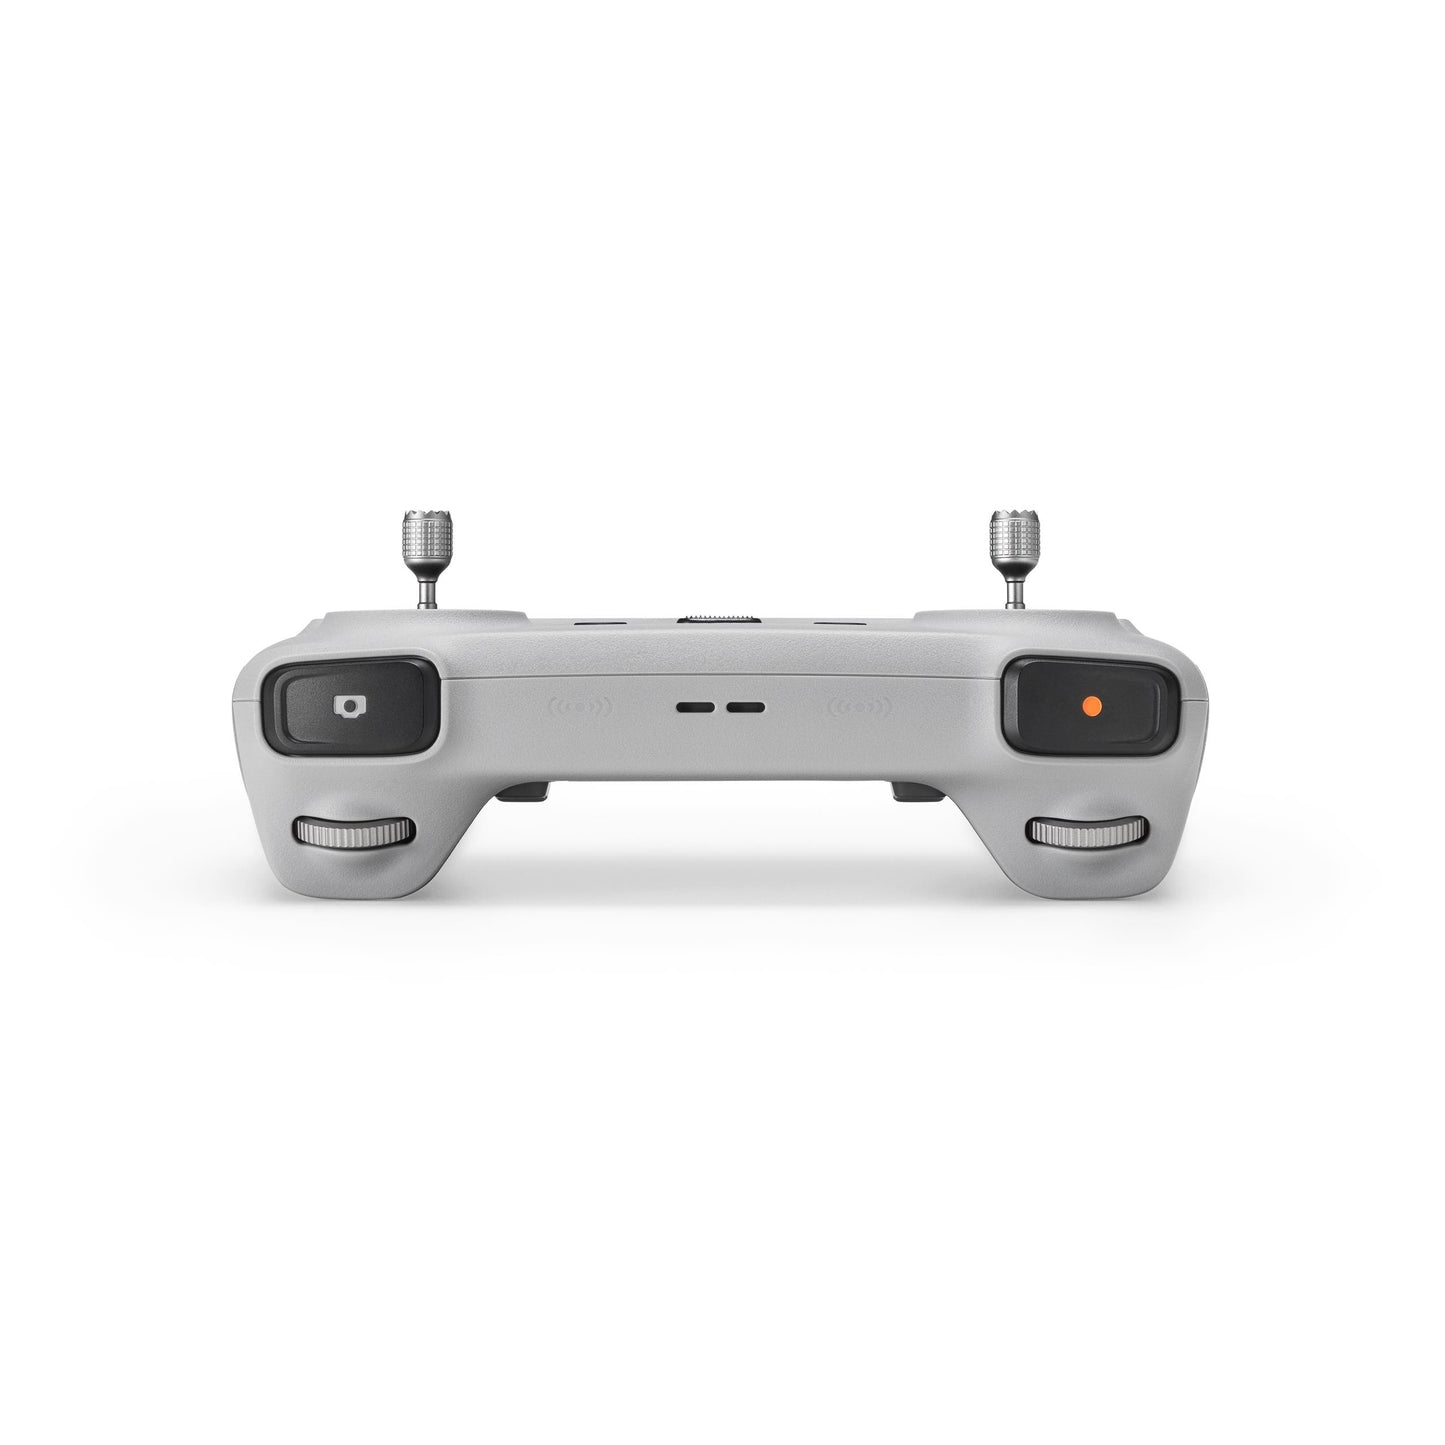 DJI RC Drone Remote Control Over WiFi with Built-In 1080p 60Hz FHD Touch Screen and microSD Card Storage Slot for Live Video Monitoring